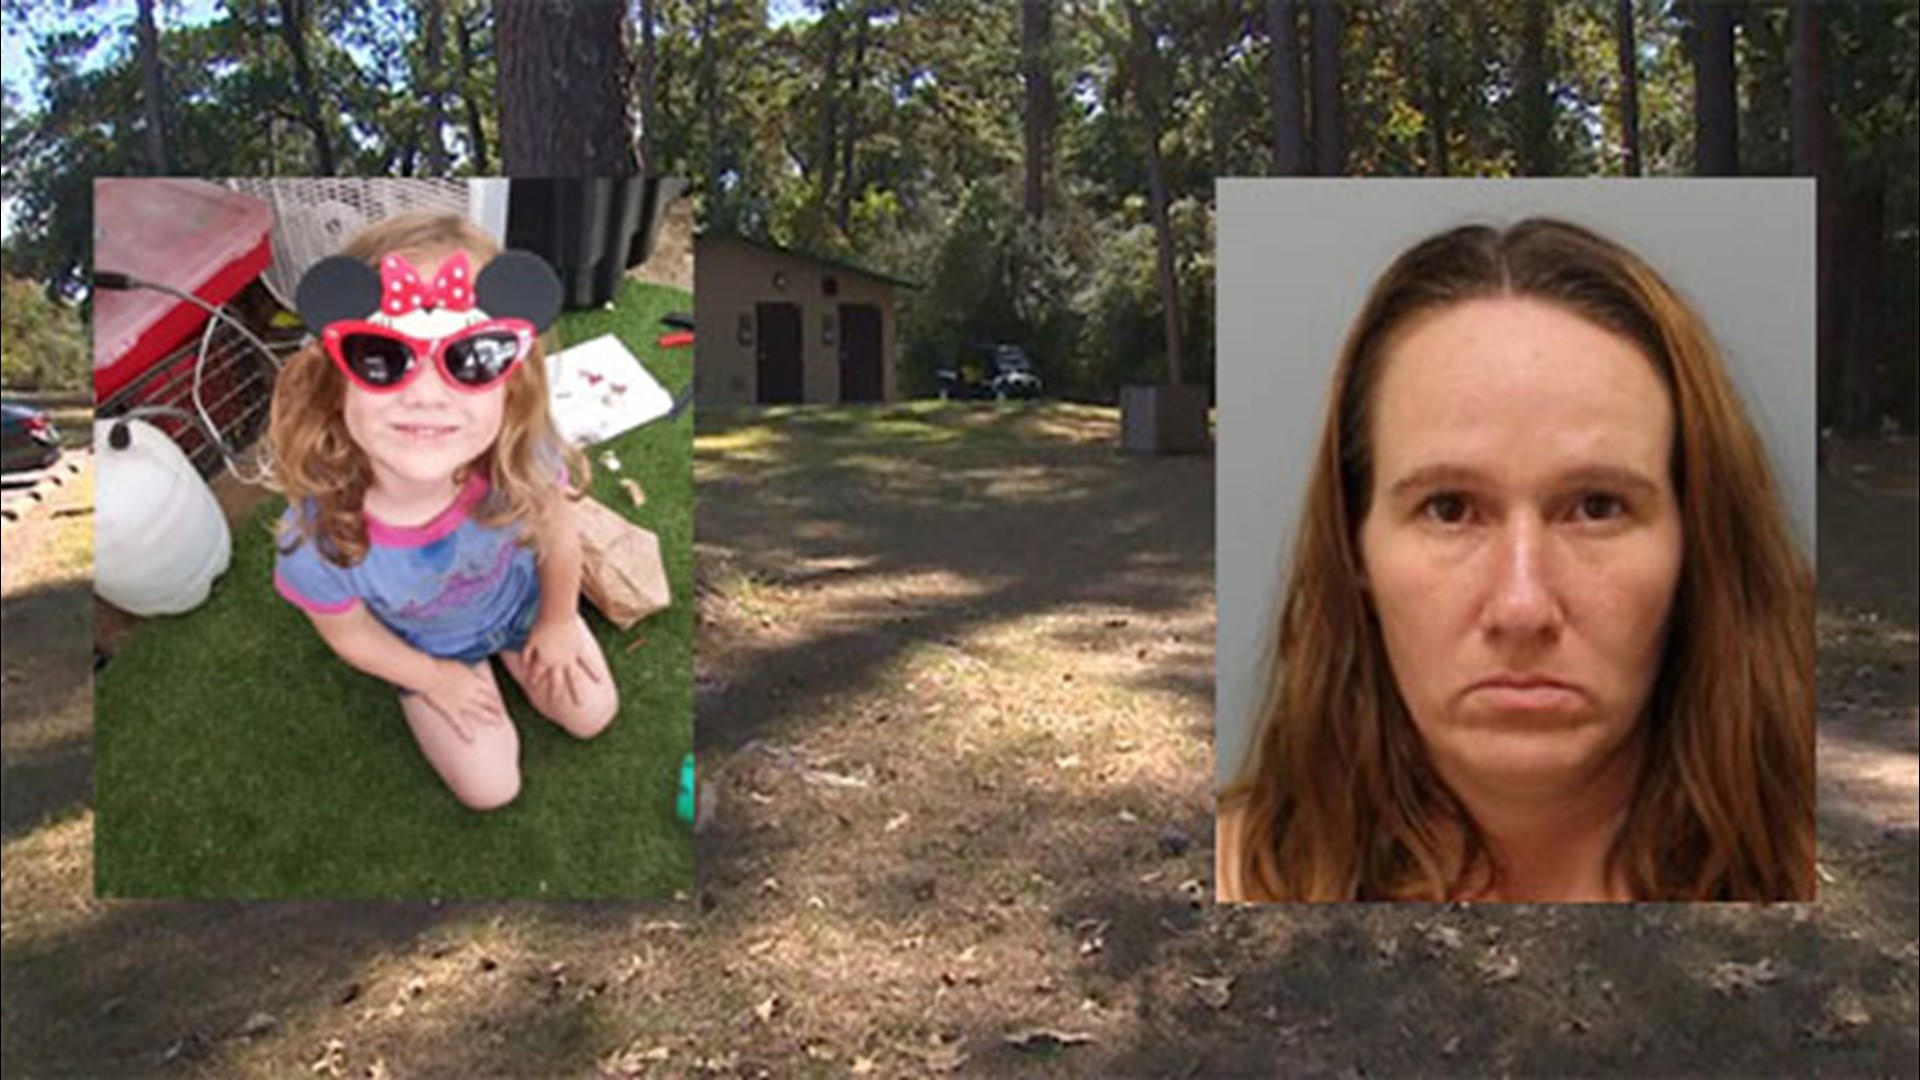 Melissa Towne, 37, brought her unresponsive daughter to the hospital with a bag around her head after authorities said she used it to suffocate the girl.